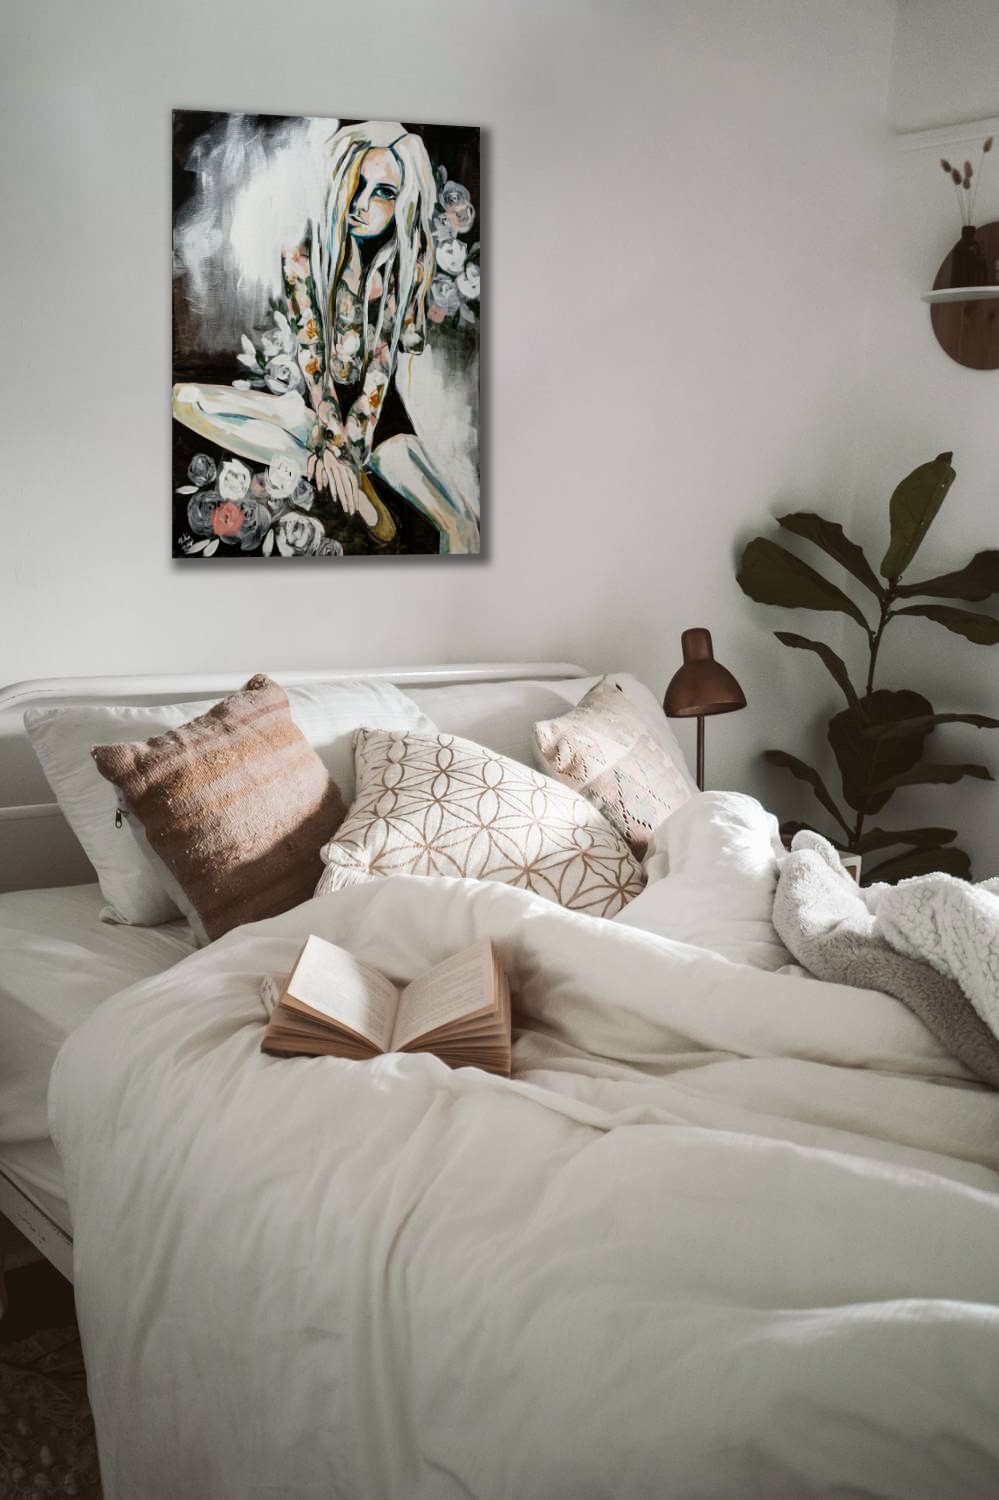 Art for the bedroom, interior design with art, acrylic artwork for your home